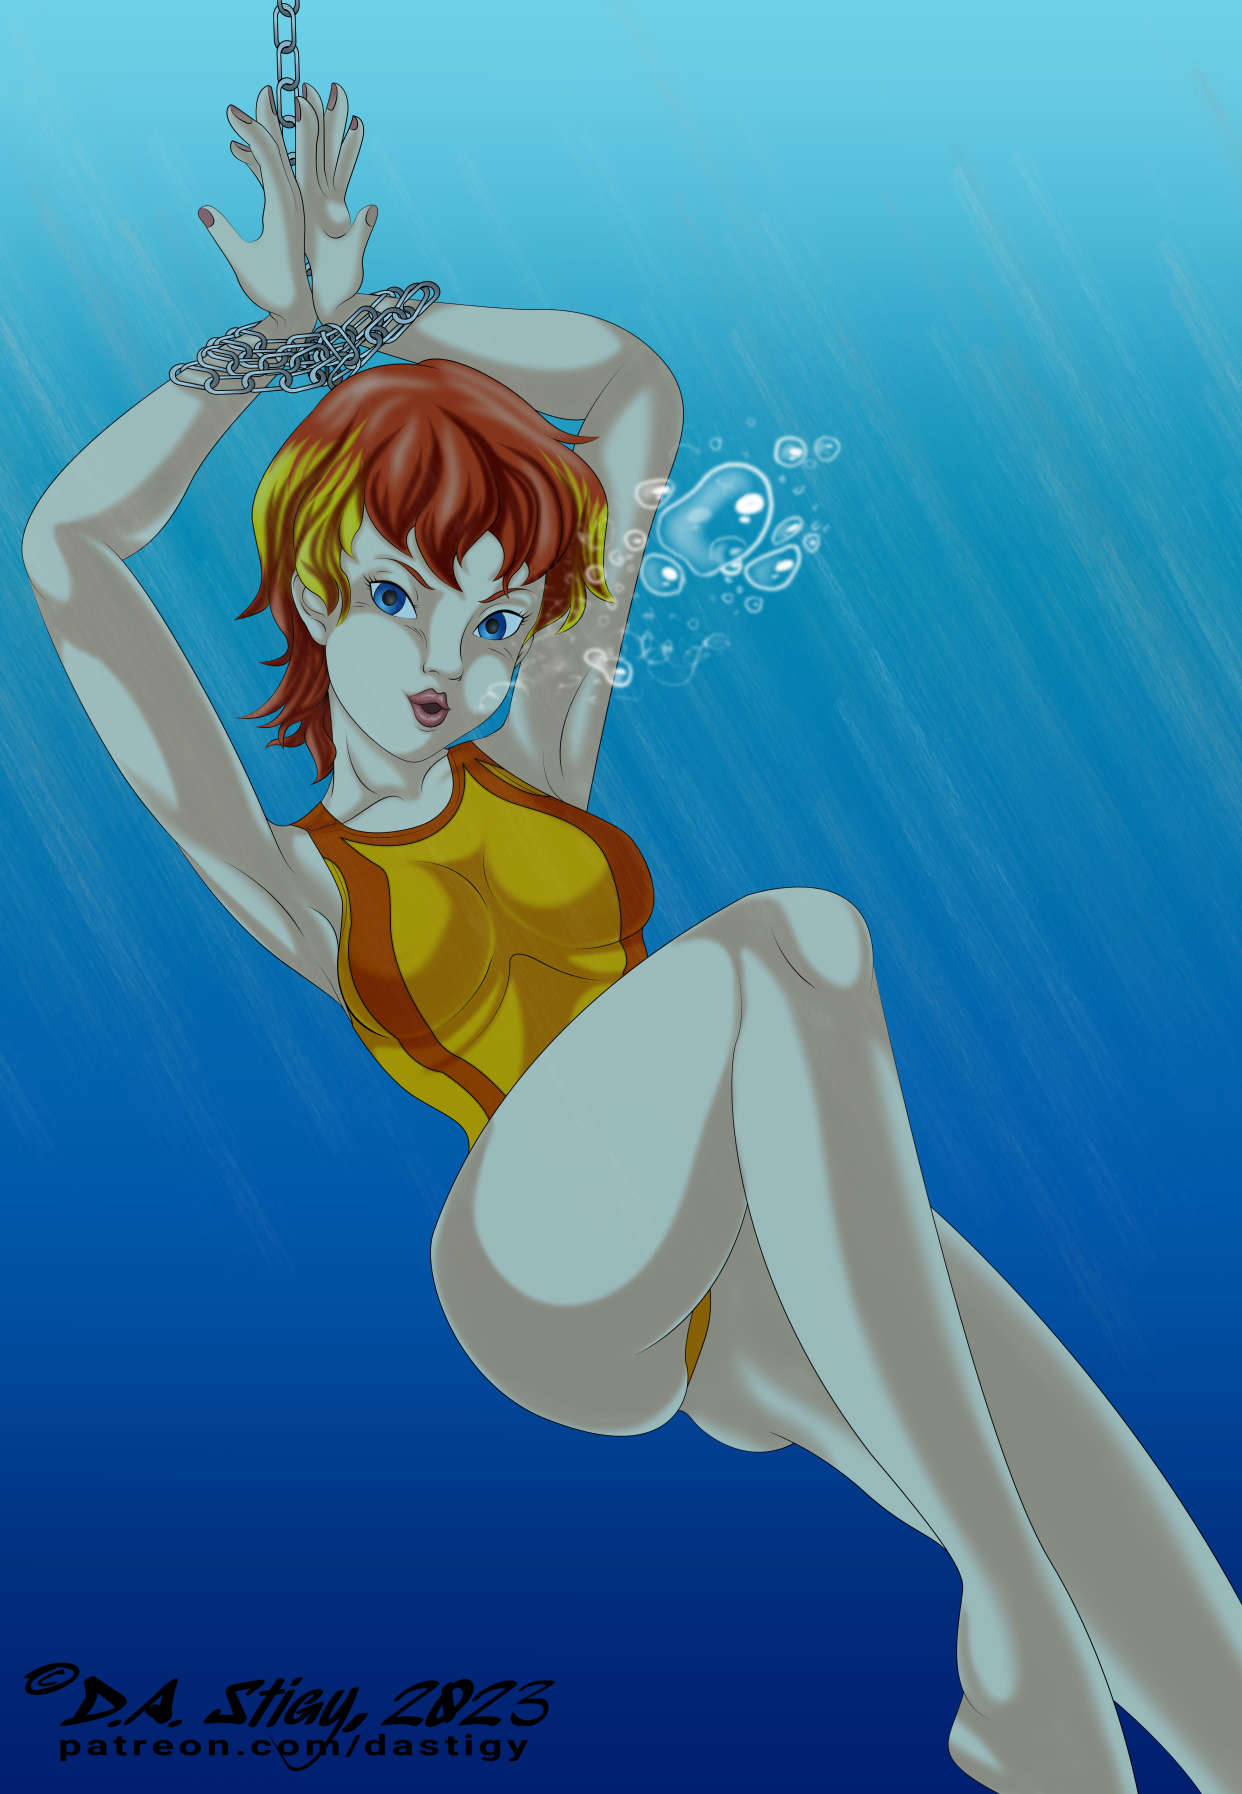 Angel, from the obscure 80's cartoon "Tiger Sharks" swimming underwater, like bait.